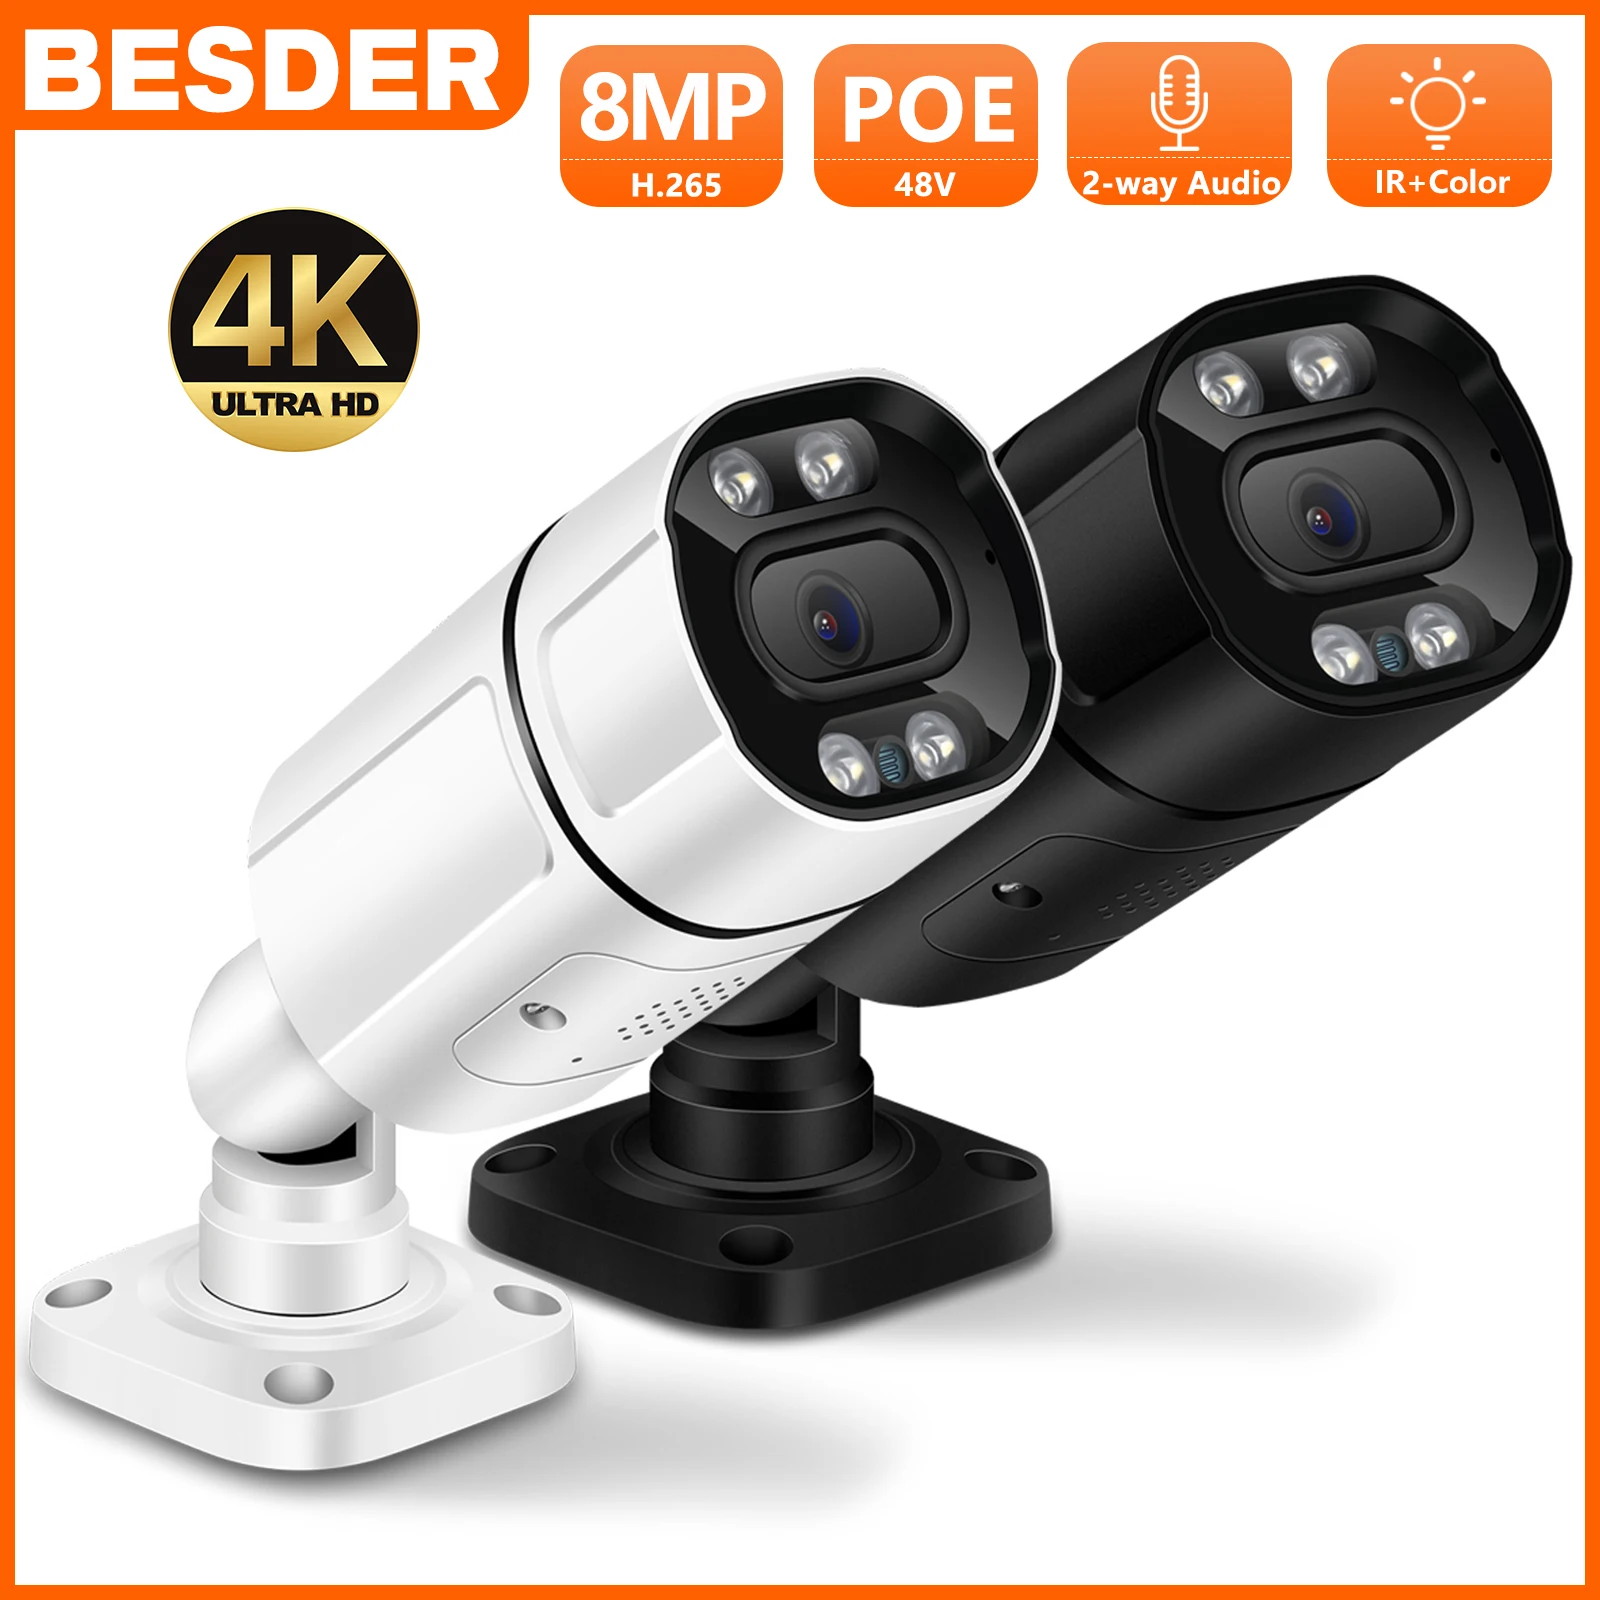 

BESDER 4K 8MP POE IP Camera H.265 4MP Outdoor Wired Bullet Camera Ai Humanoid Motion Detection IR P2P Two Way Audio Alarm Camera